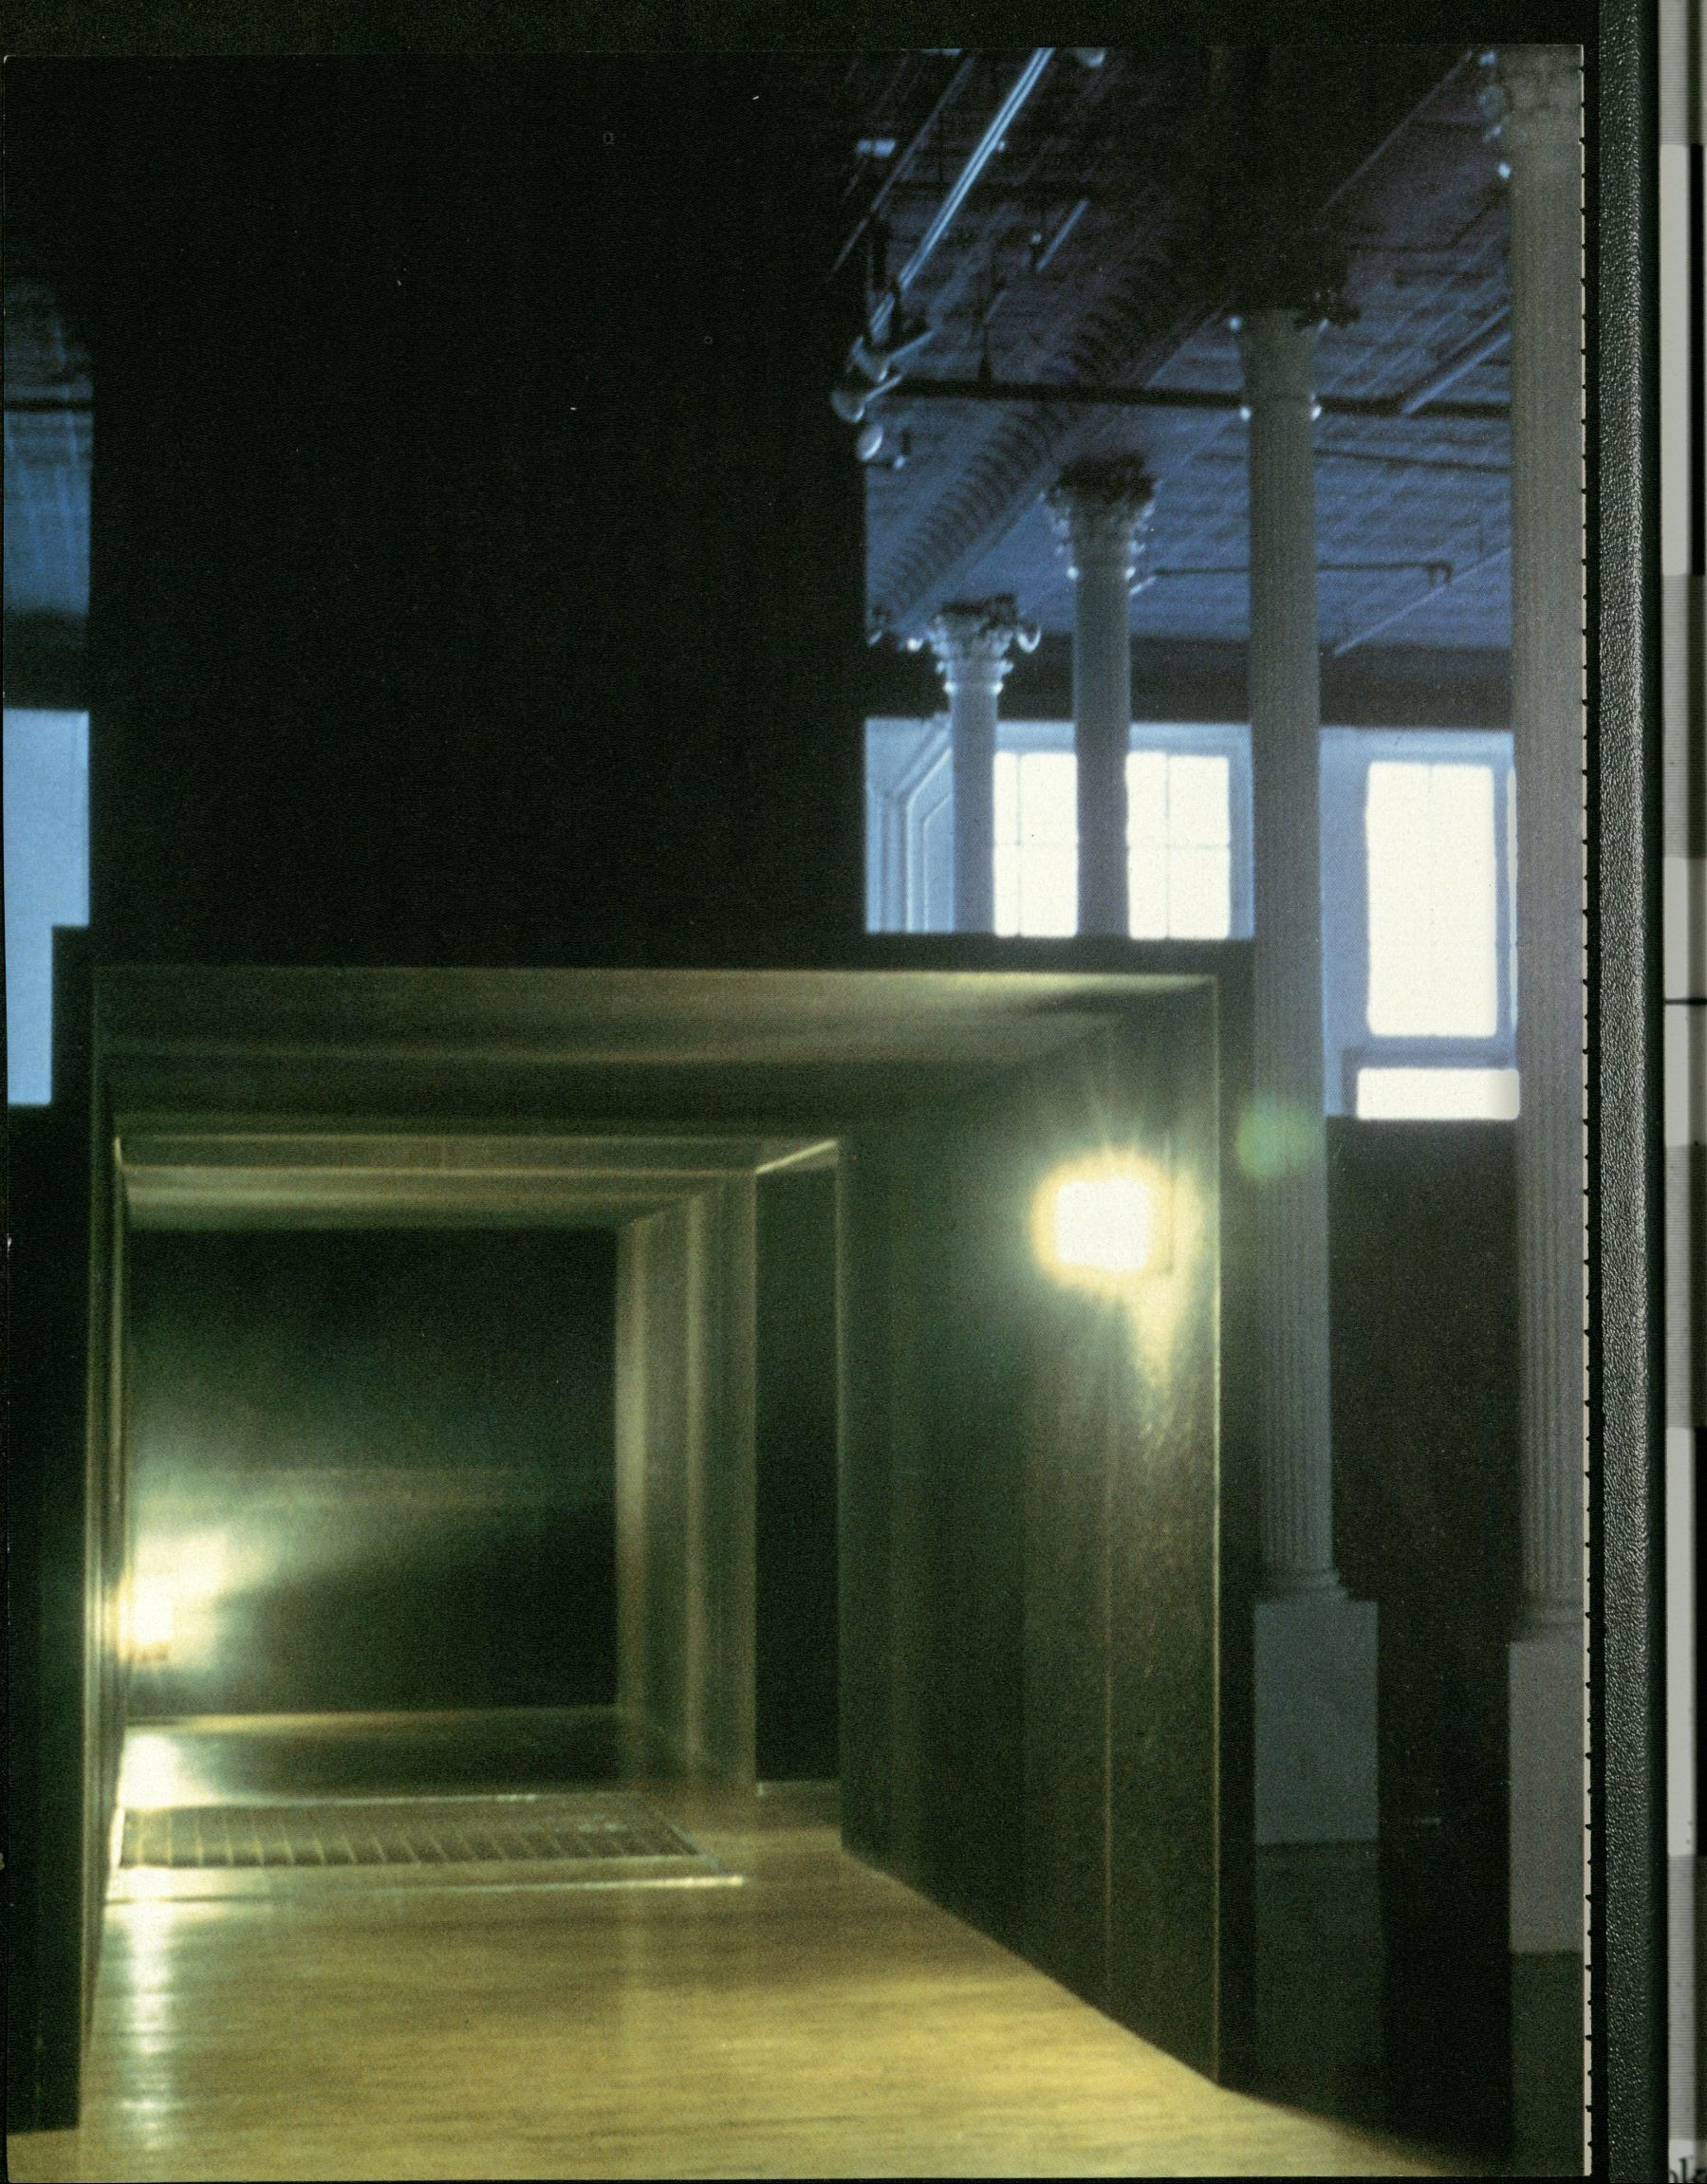 A model of the original installation, created for an exhibit on Nauman's works. Photo taken for the Contemporanea International Art Magazine, Vol III No 2, Facility Planning #028